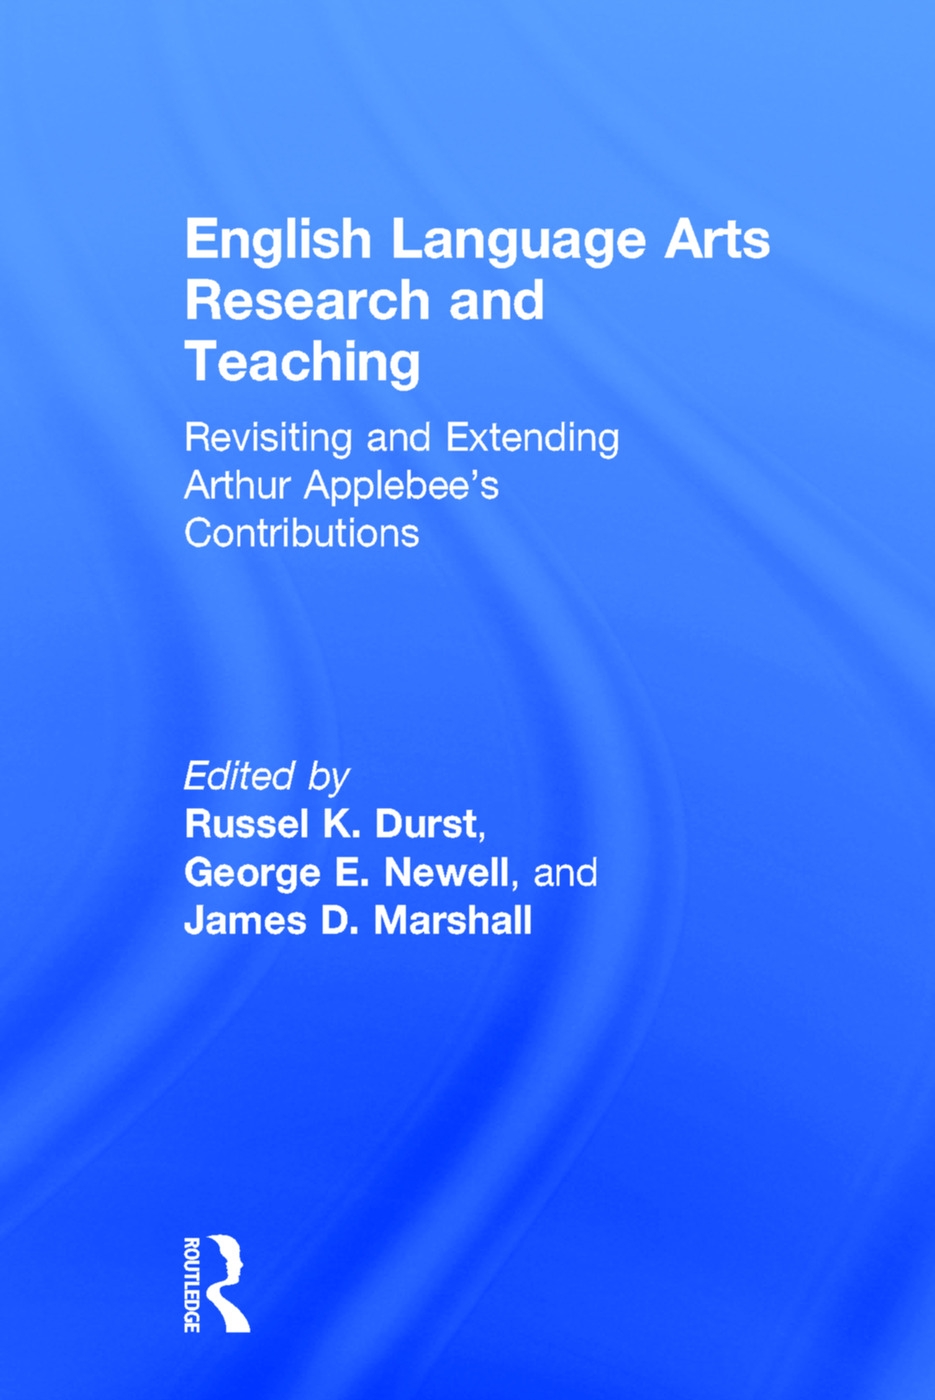 English Language Arts Research and Teaching: Revisiting and Extending Arthur Applebee’s Contributions